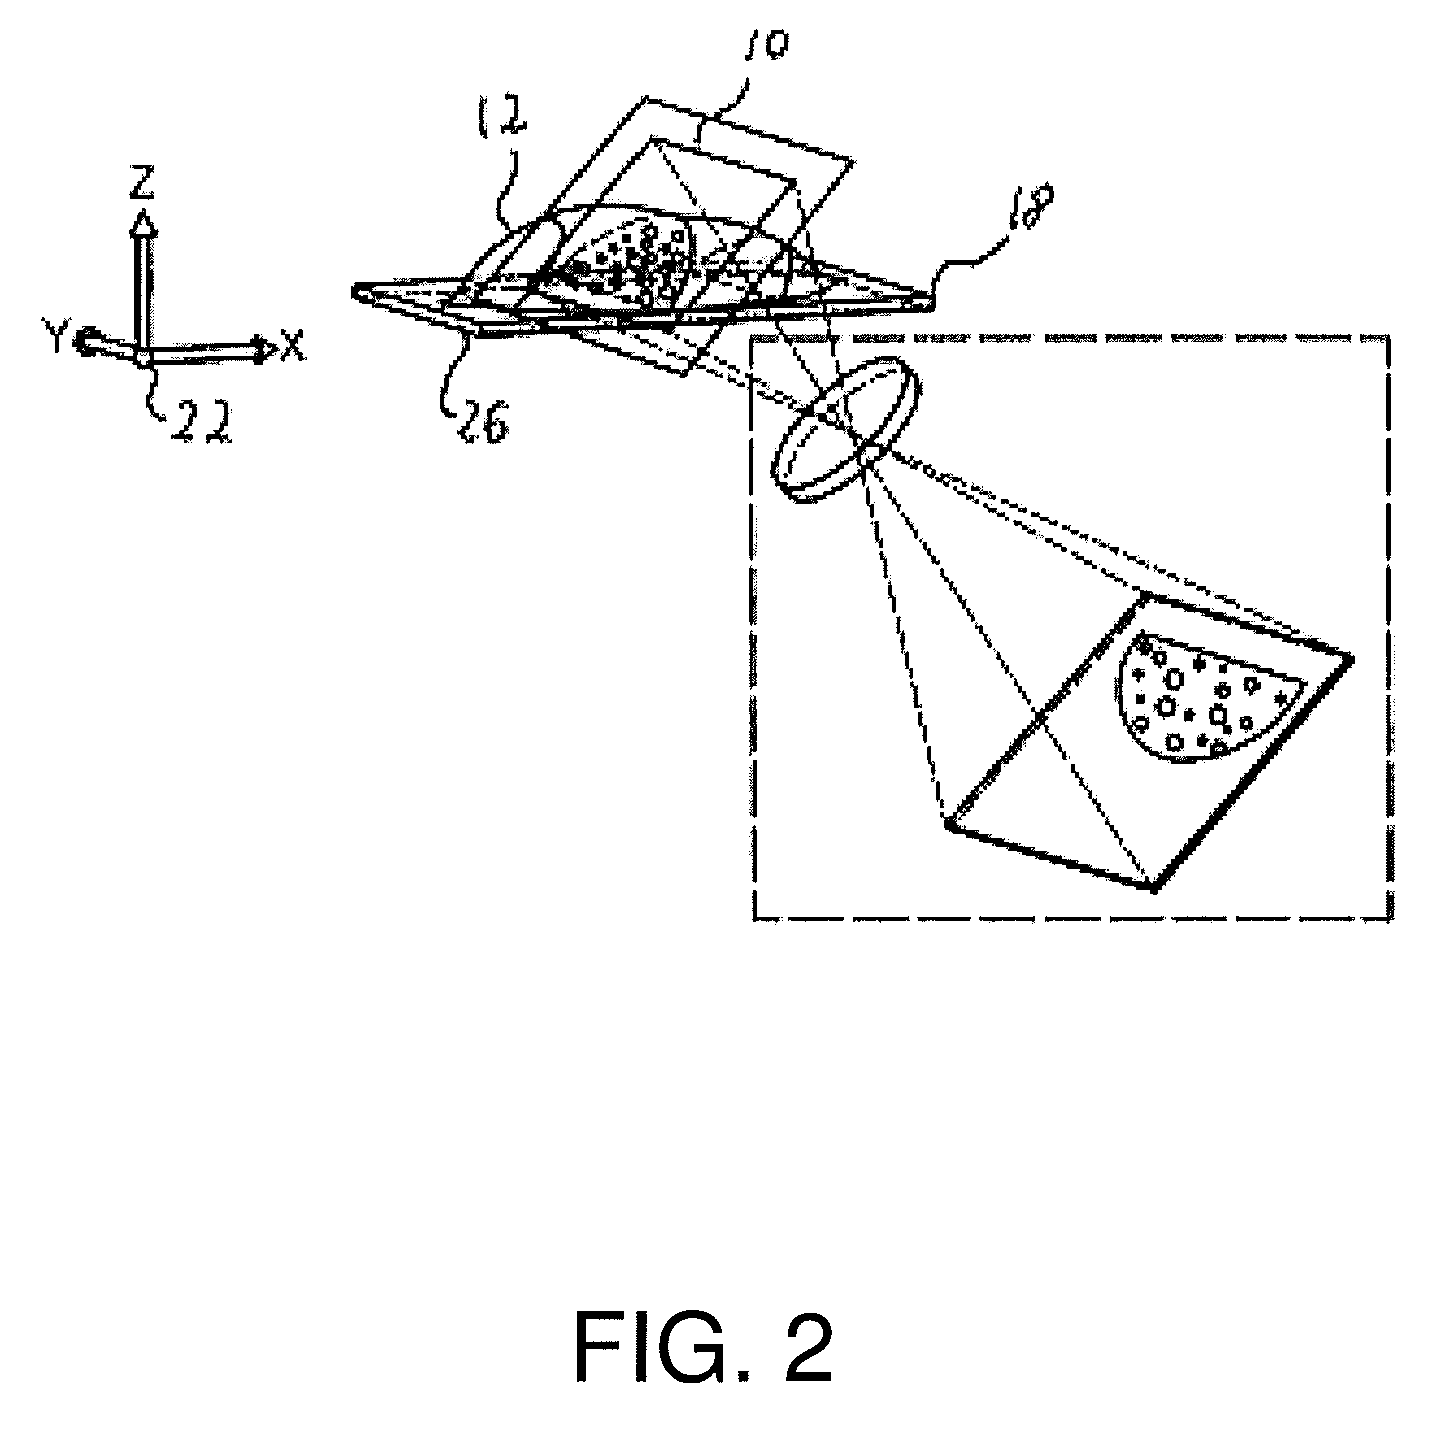 Optical sectioning of a sample and detection of particles in a sample